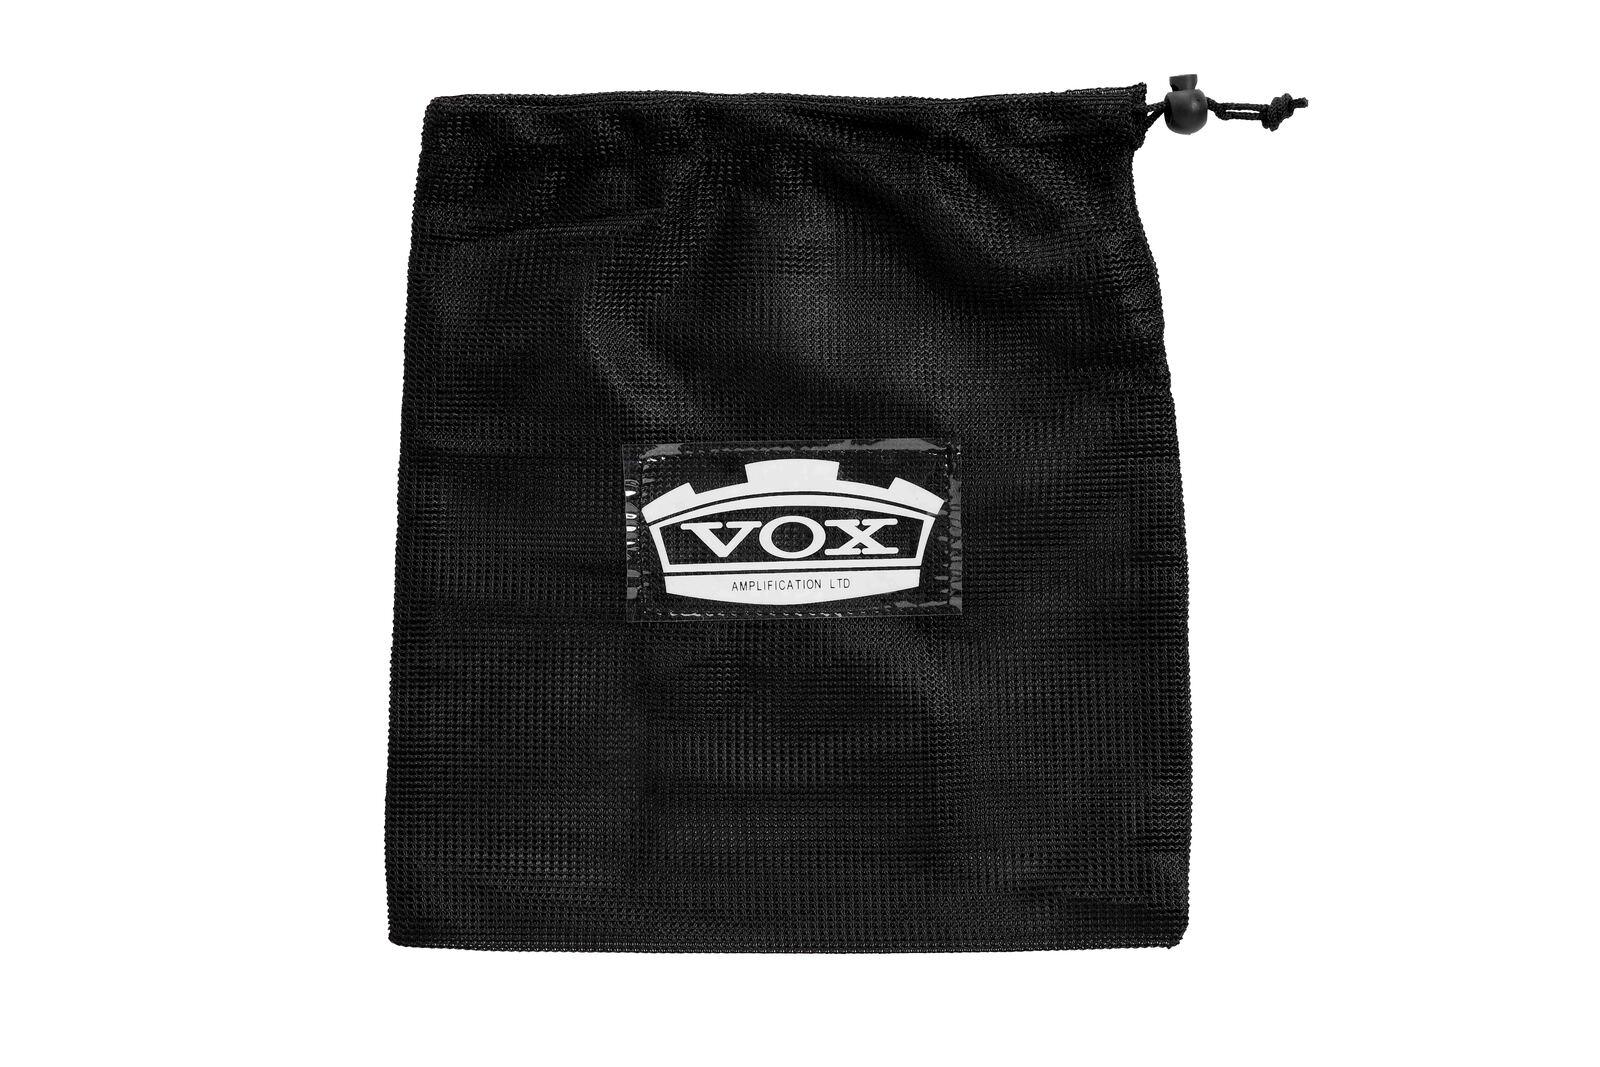 Vox Black Coiled Cable 9m - Accessories - Cables & Adaptors by VOX at Muso's Stuff